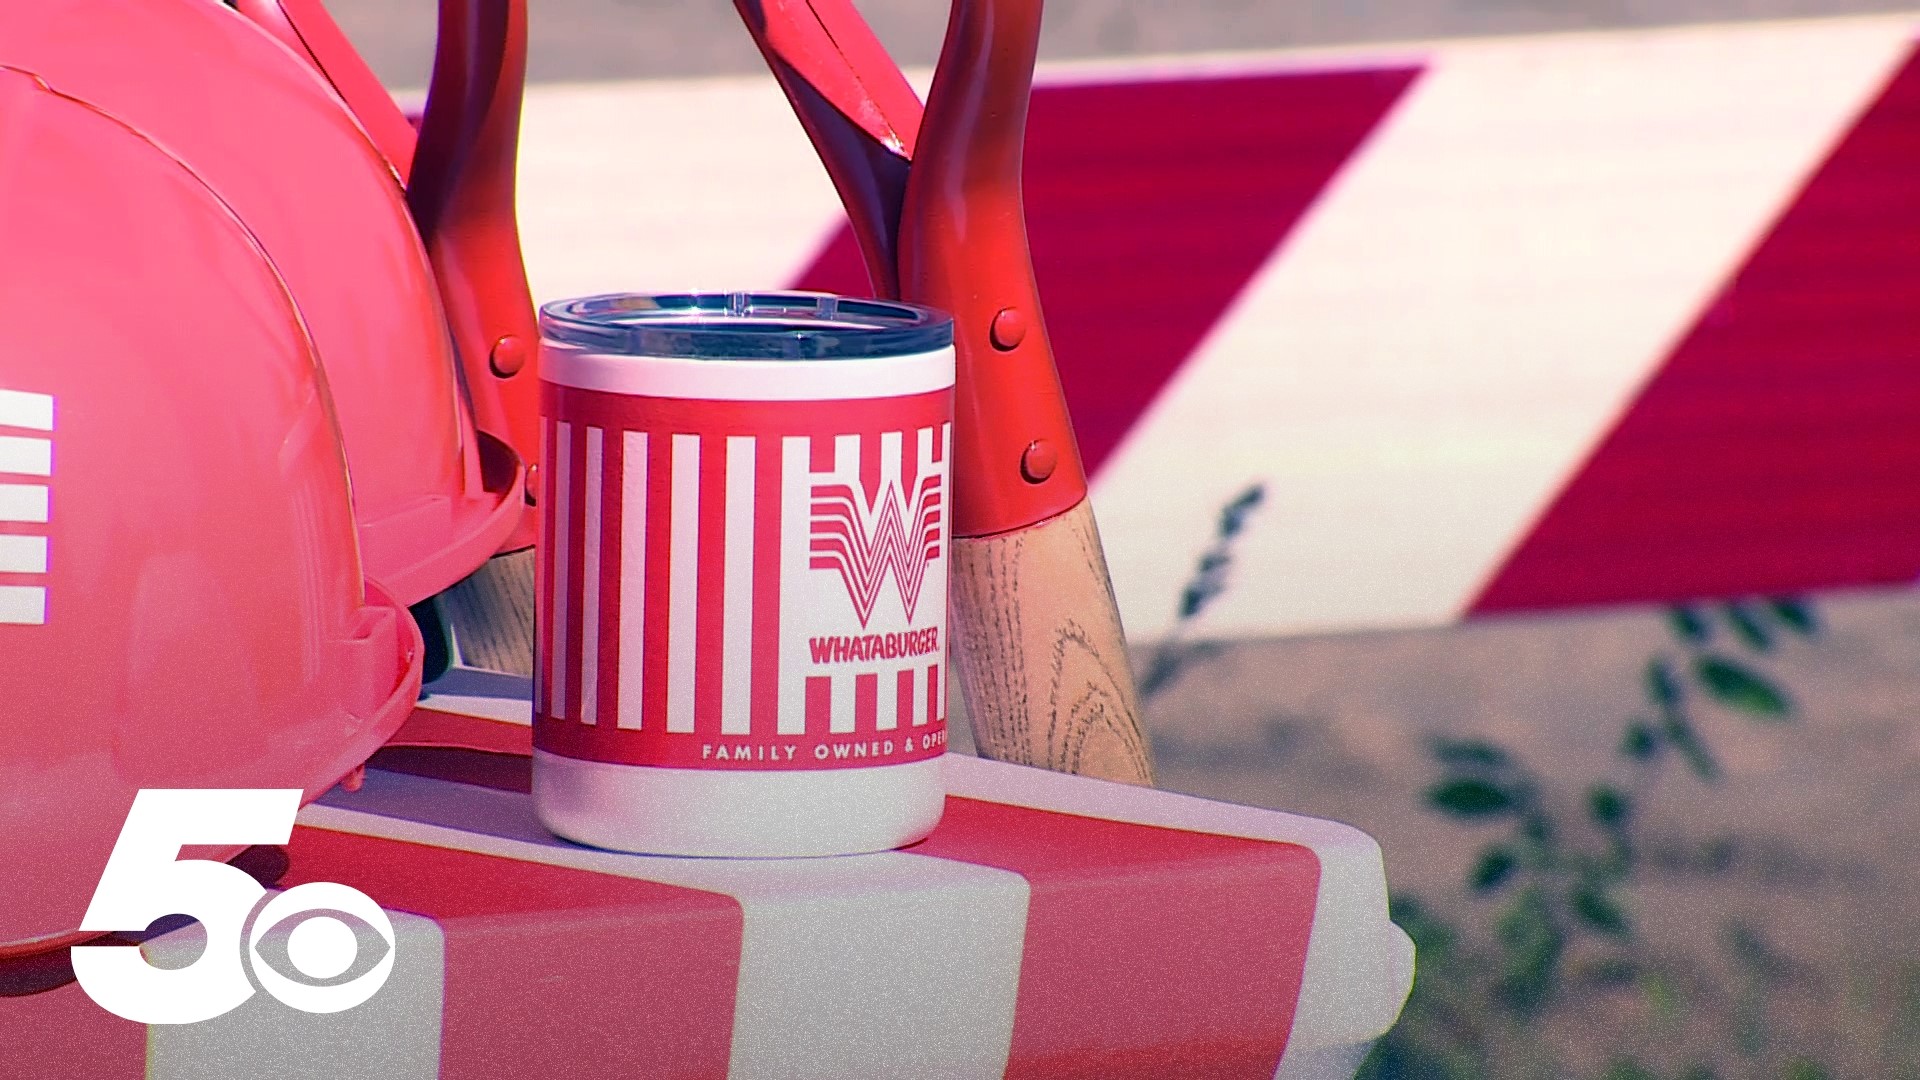 Fort Smith's first-ever Whataburger restaurant broke ground to start construction with the expected open date this upcoming fall.